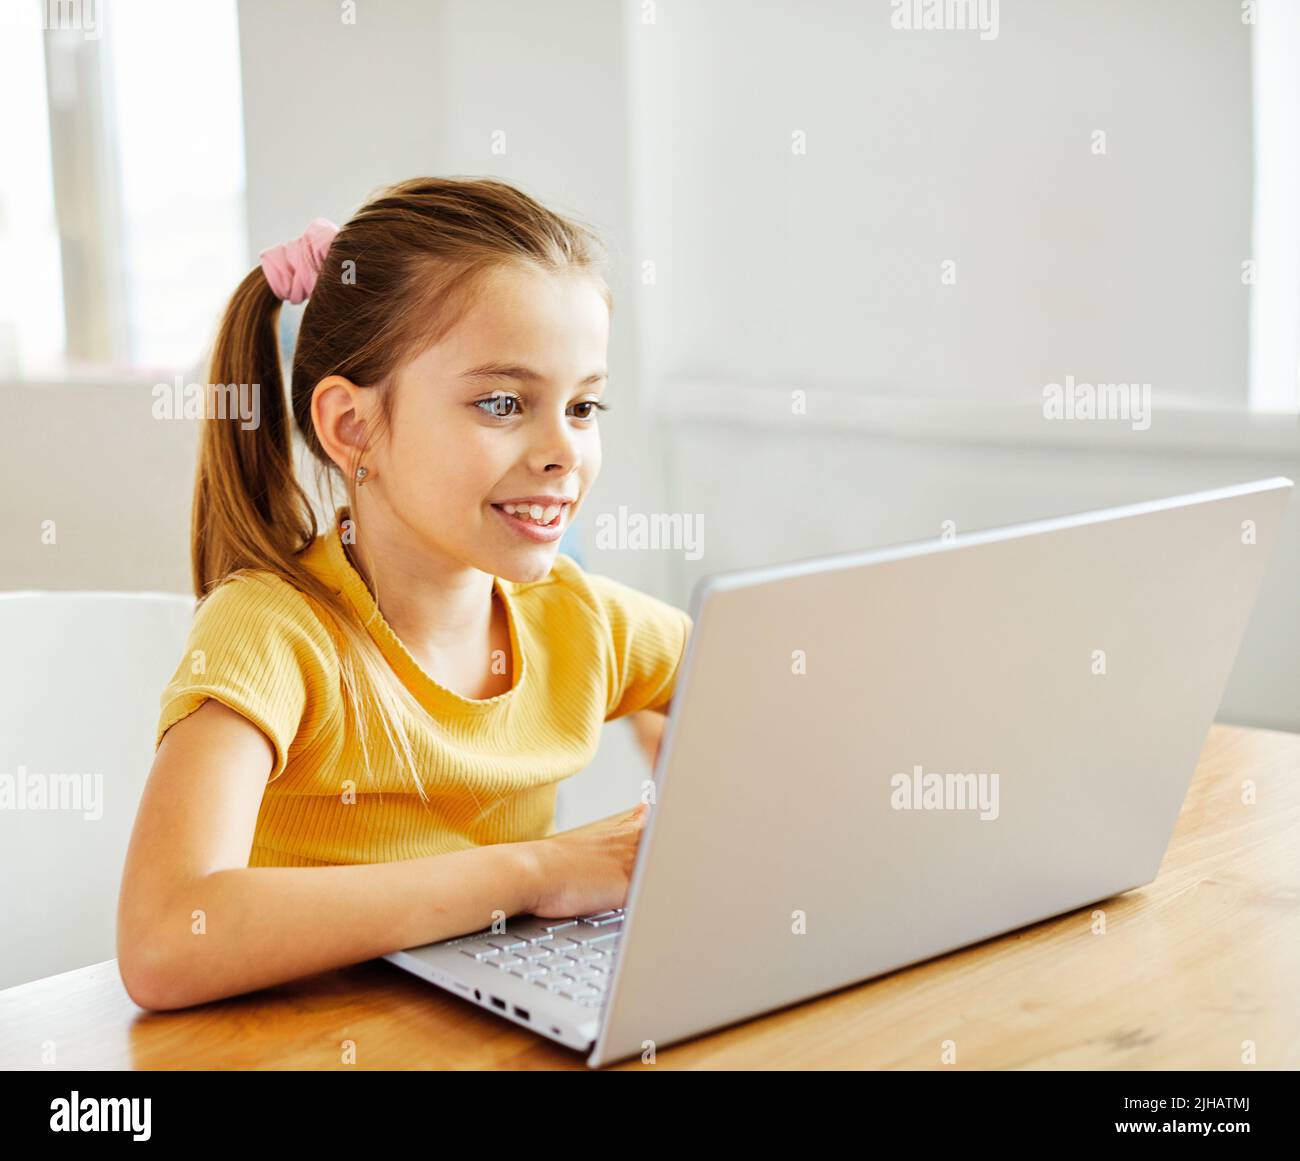 child laptop computer technology home girl education homework kid learning internet childhood student sitting connection using online Stock Photo